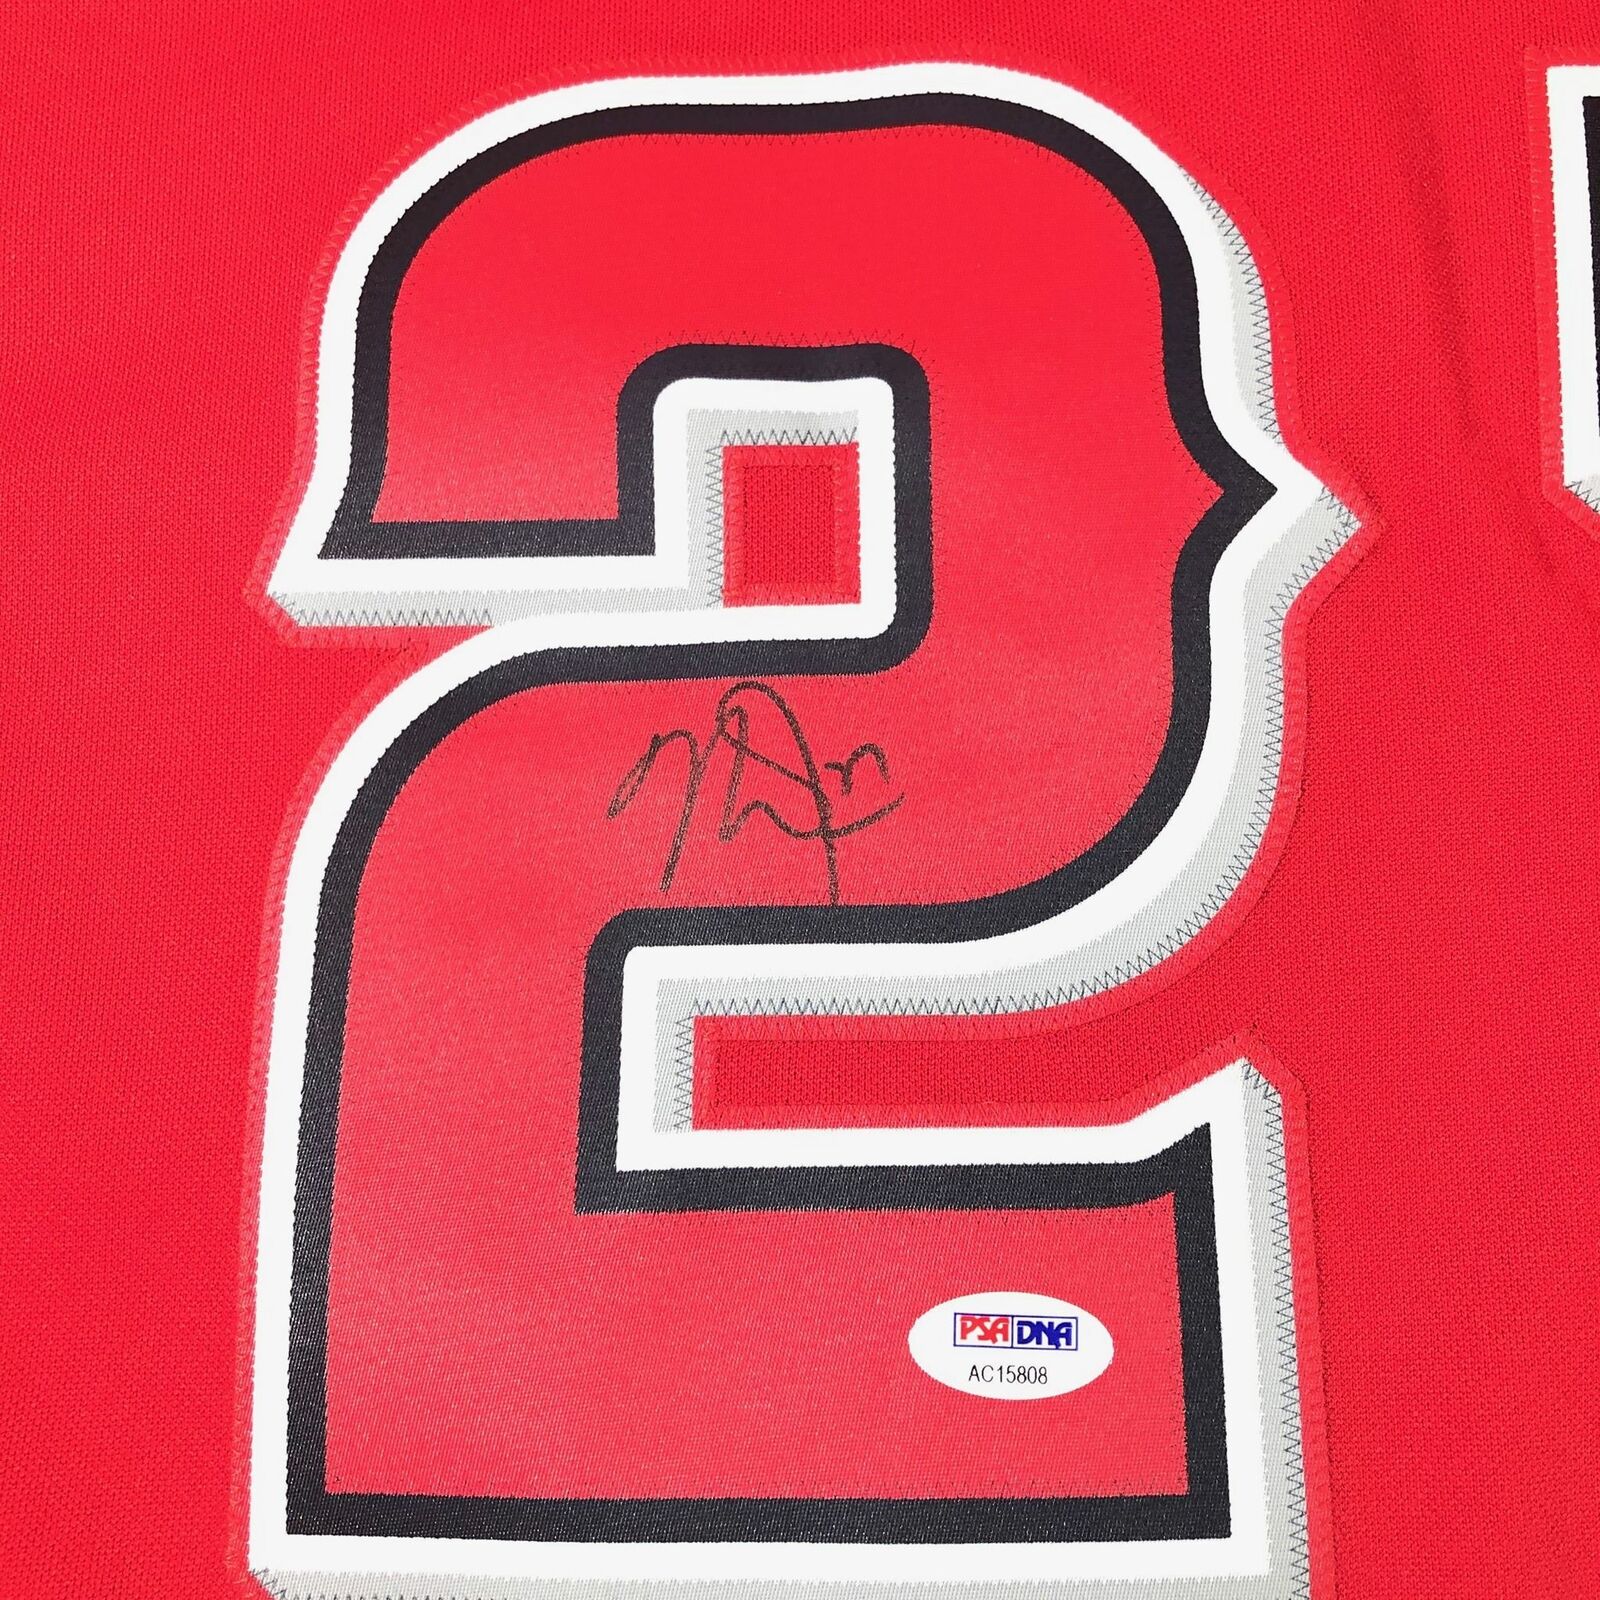 Mike Trout Autographed Angels Jersey White - The Autograph Source